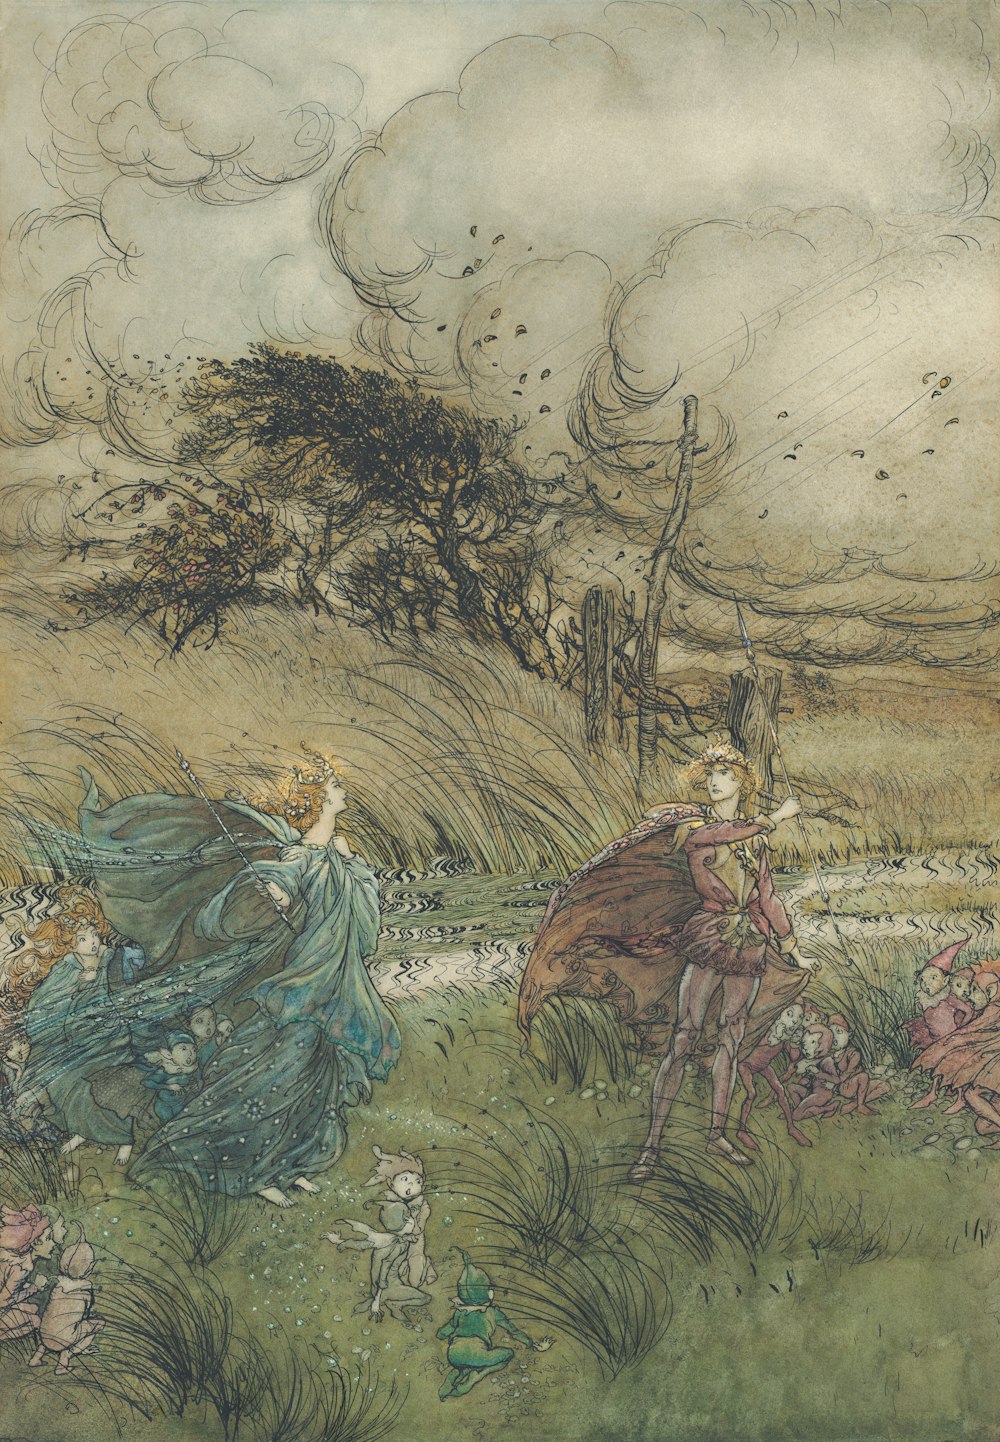 a painting of a woman riding a horse in a field